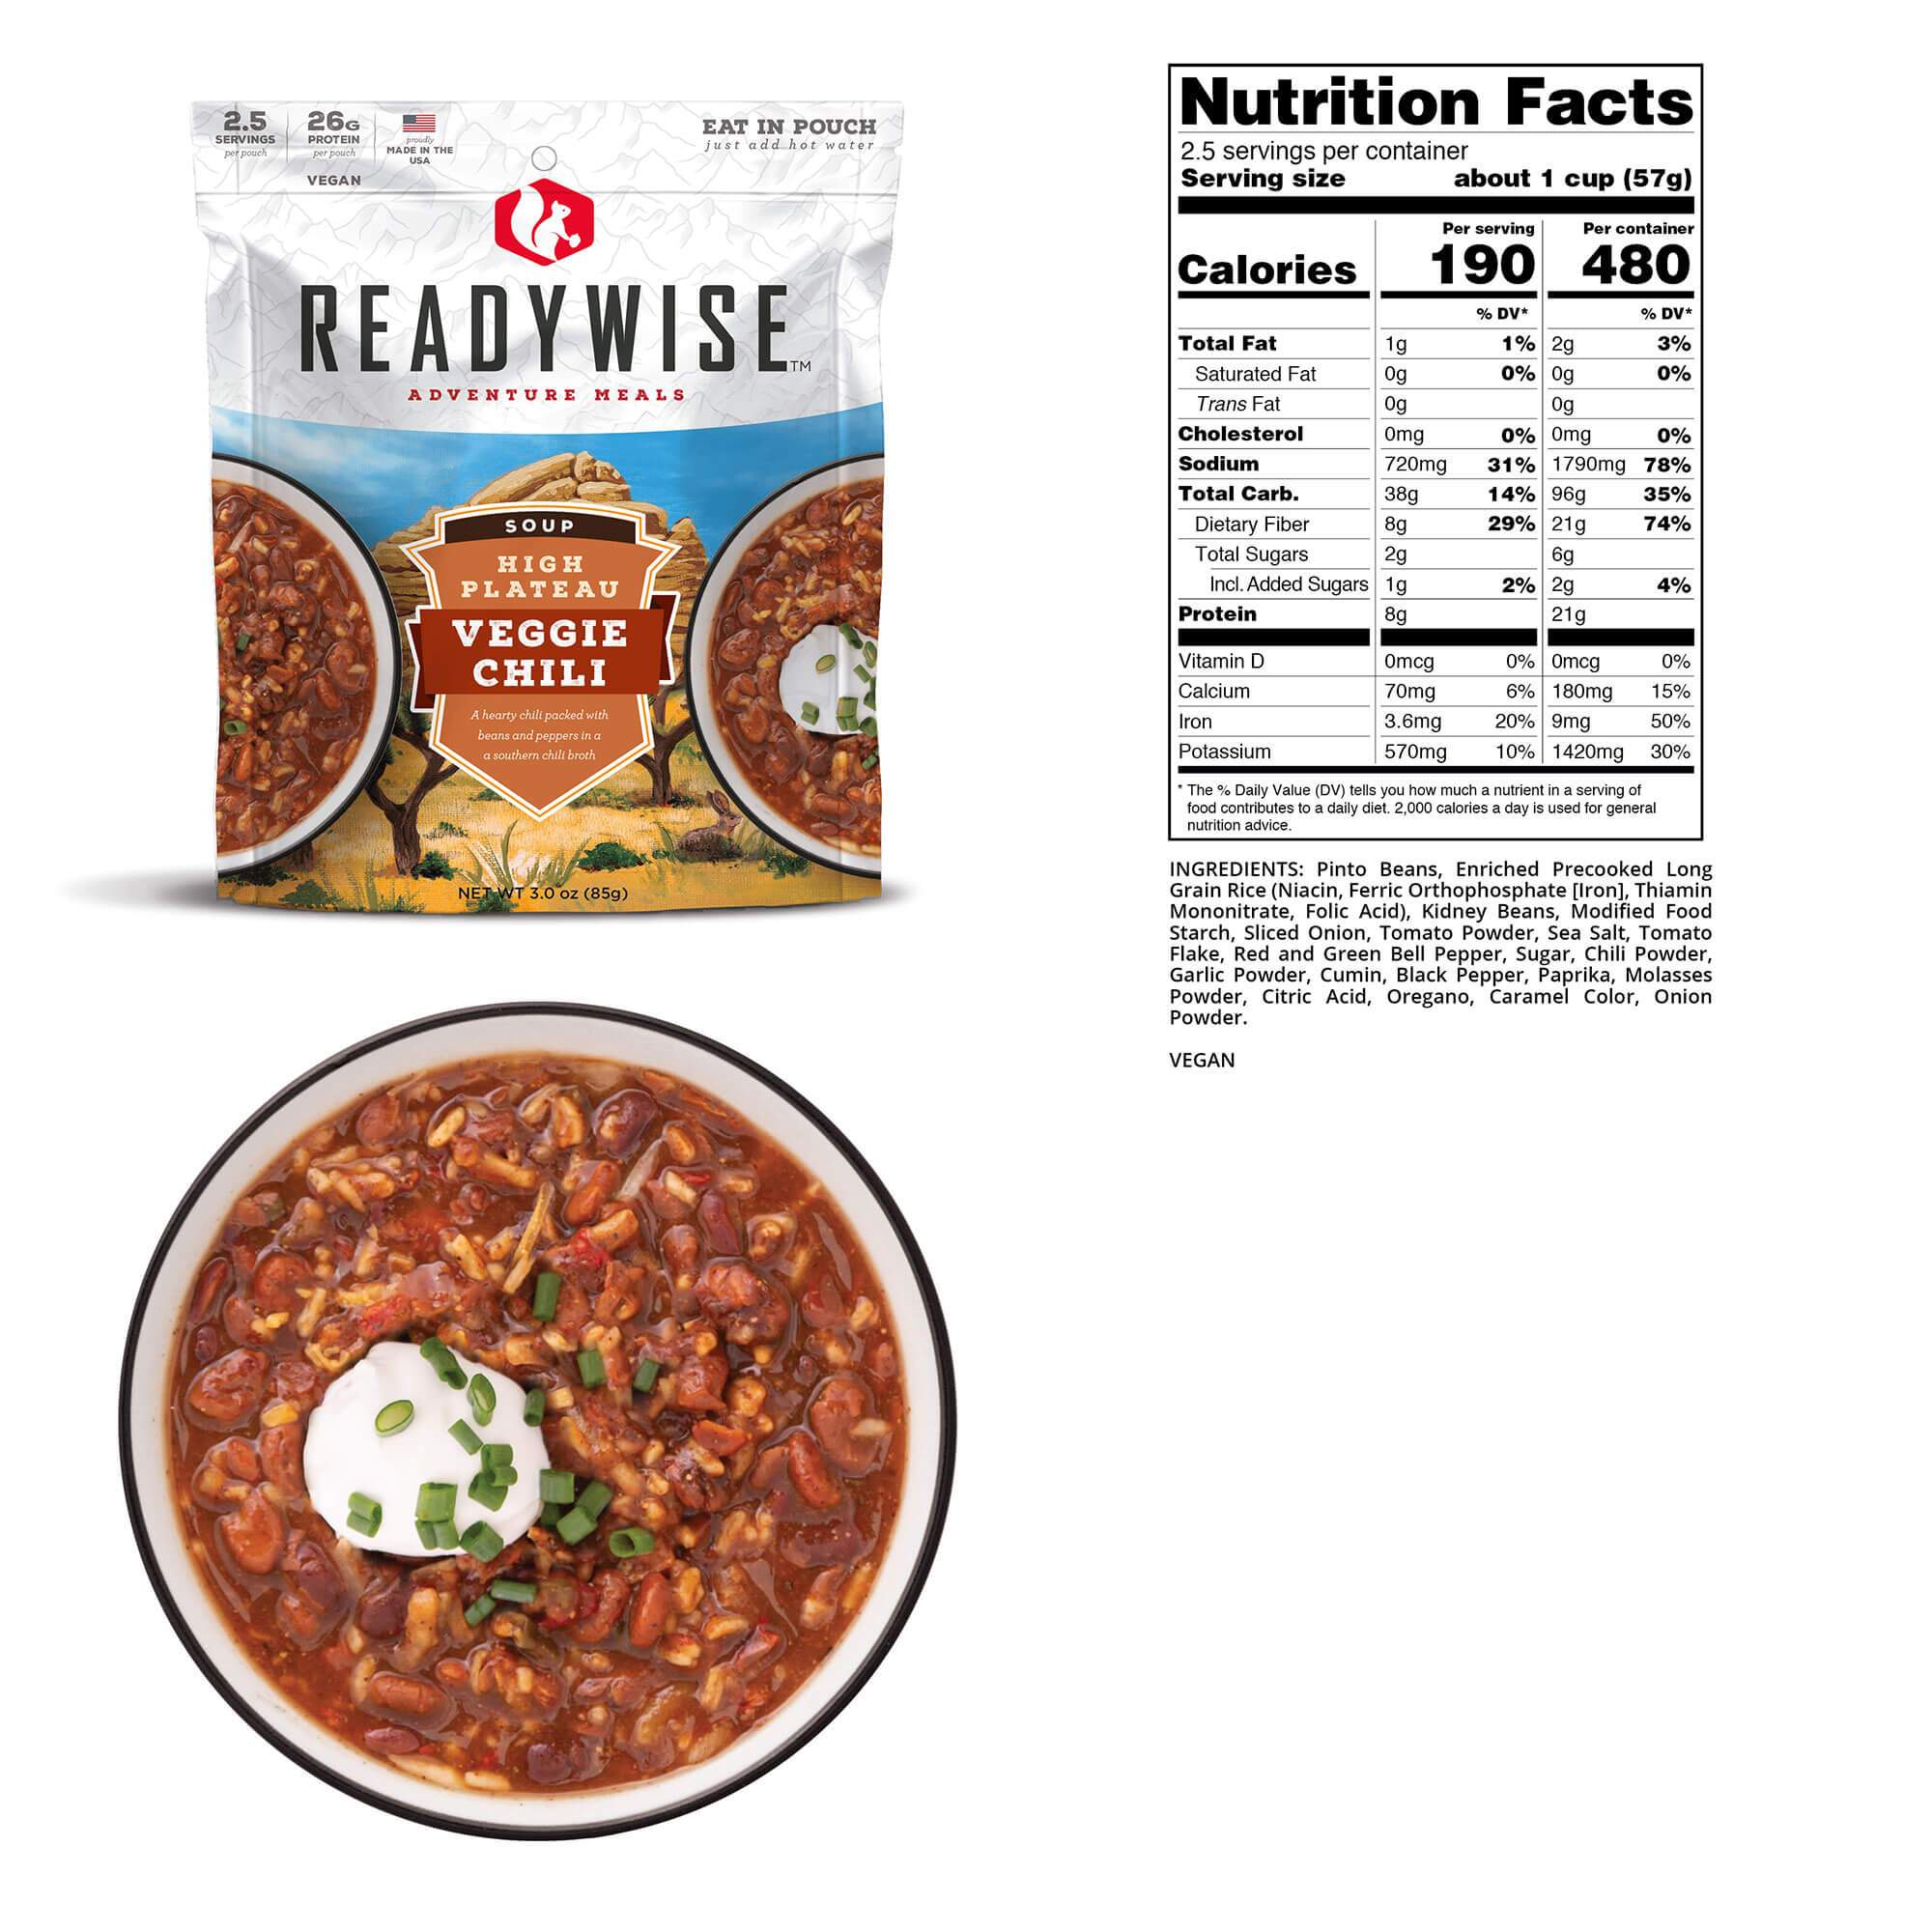 A bag of ReadyWise Hunting Food Calorie Booster with a label on it.